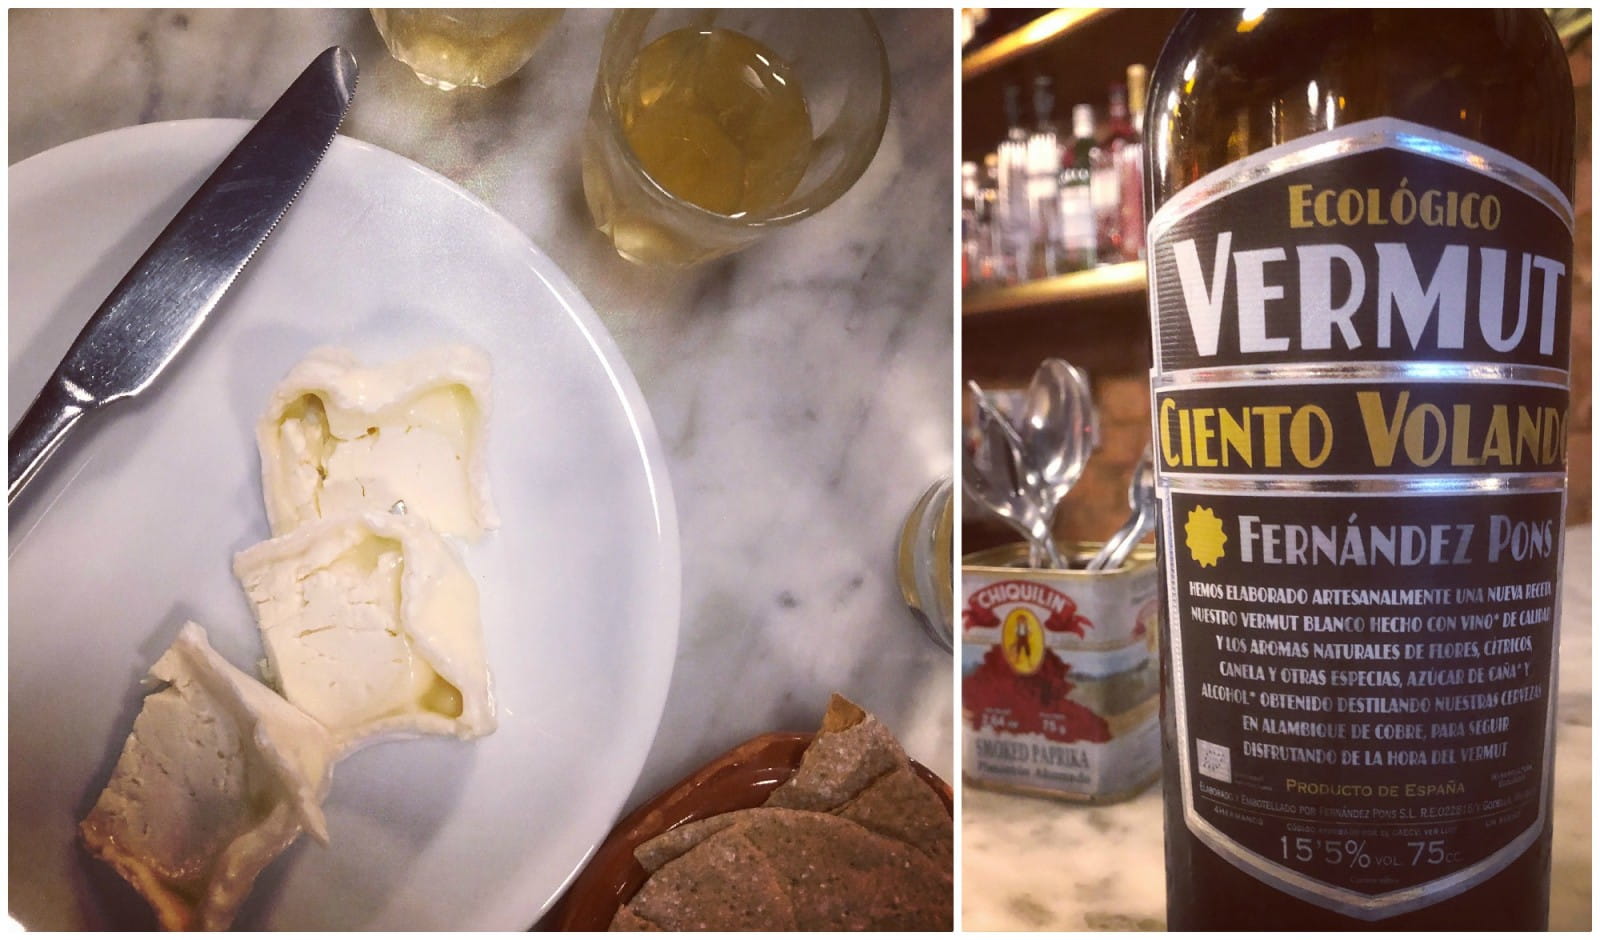 Chaource cheese paired with vermouth